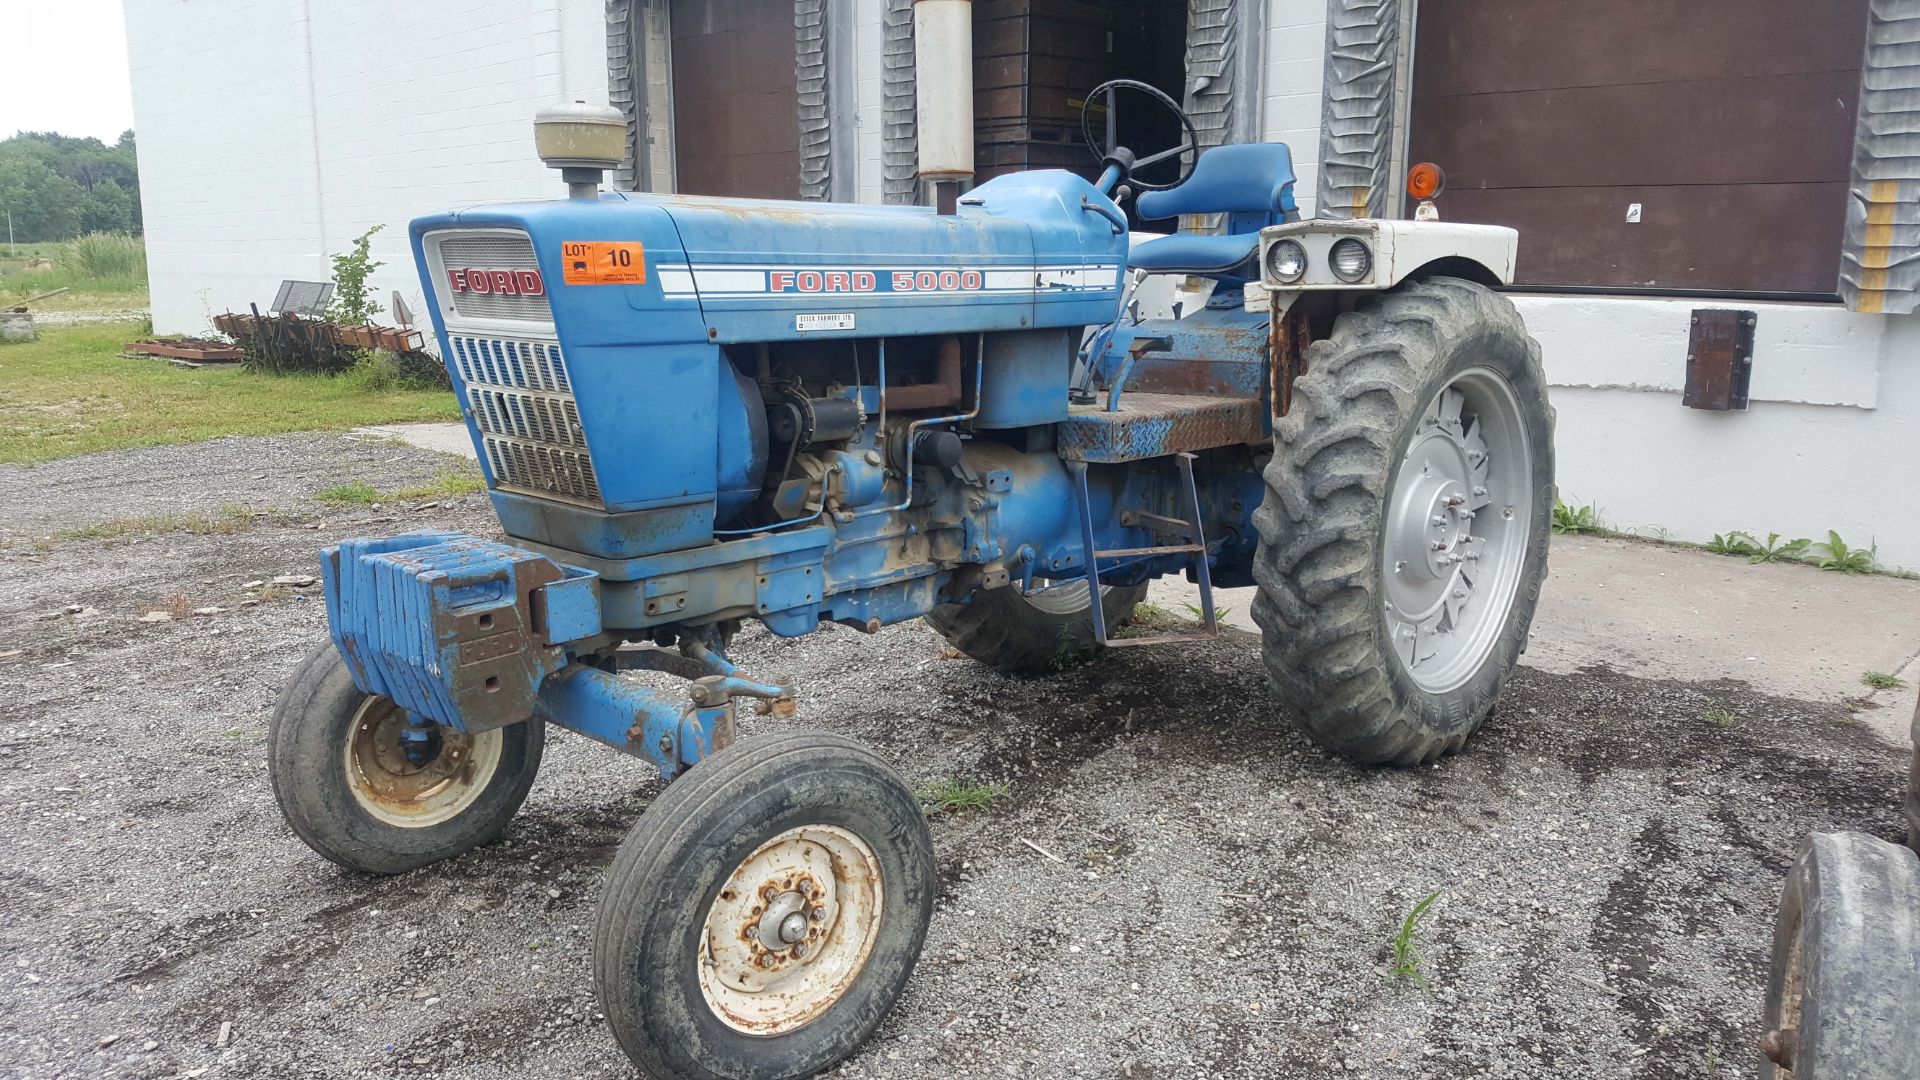 FORD 5000 DIESEL TRACTOR WITH 3.8L 4 CYLINDER ENGINE, 58" REAR TIRES, 3 POINT HITCH, S/N: N/A